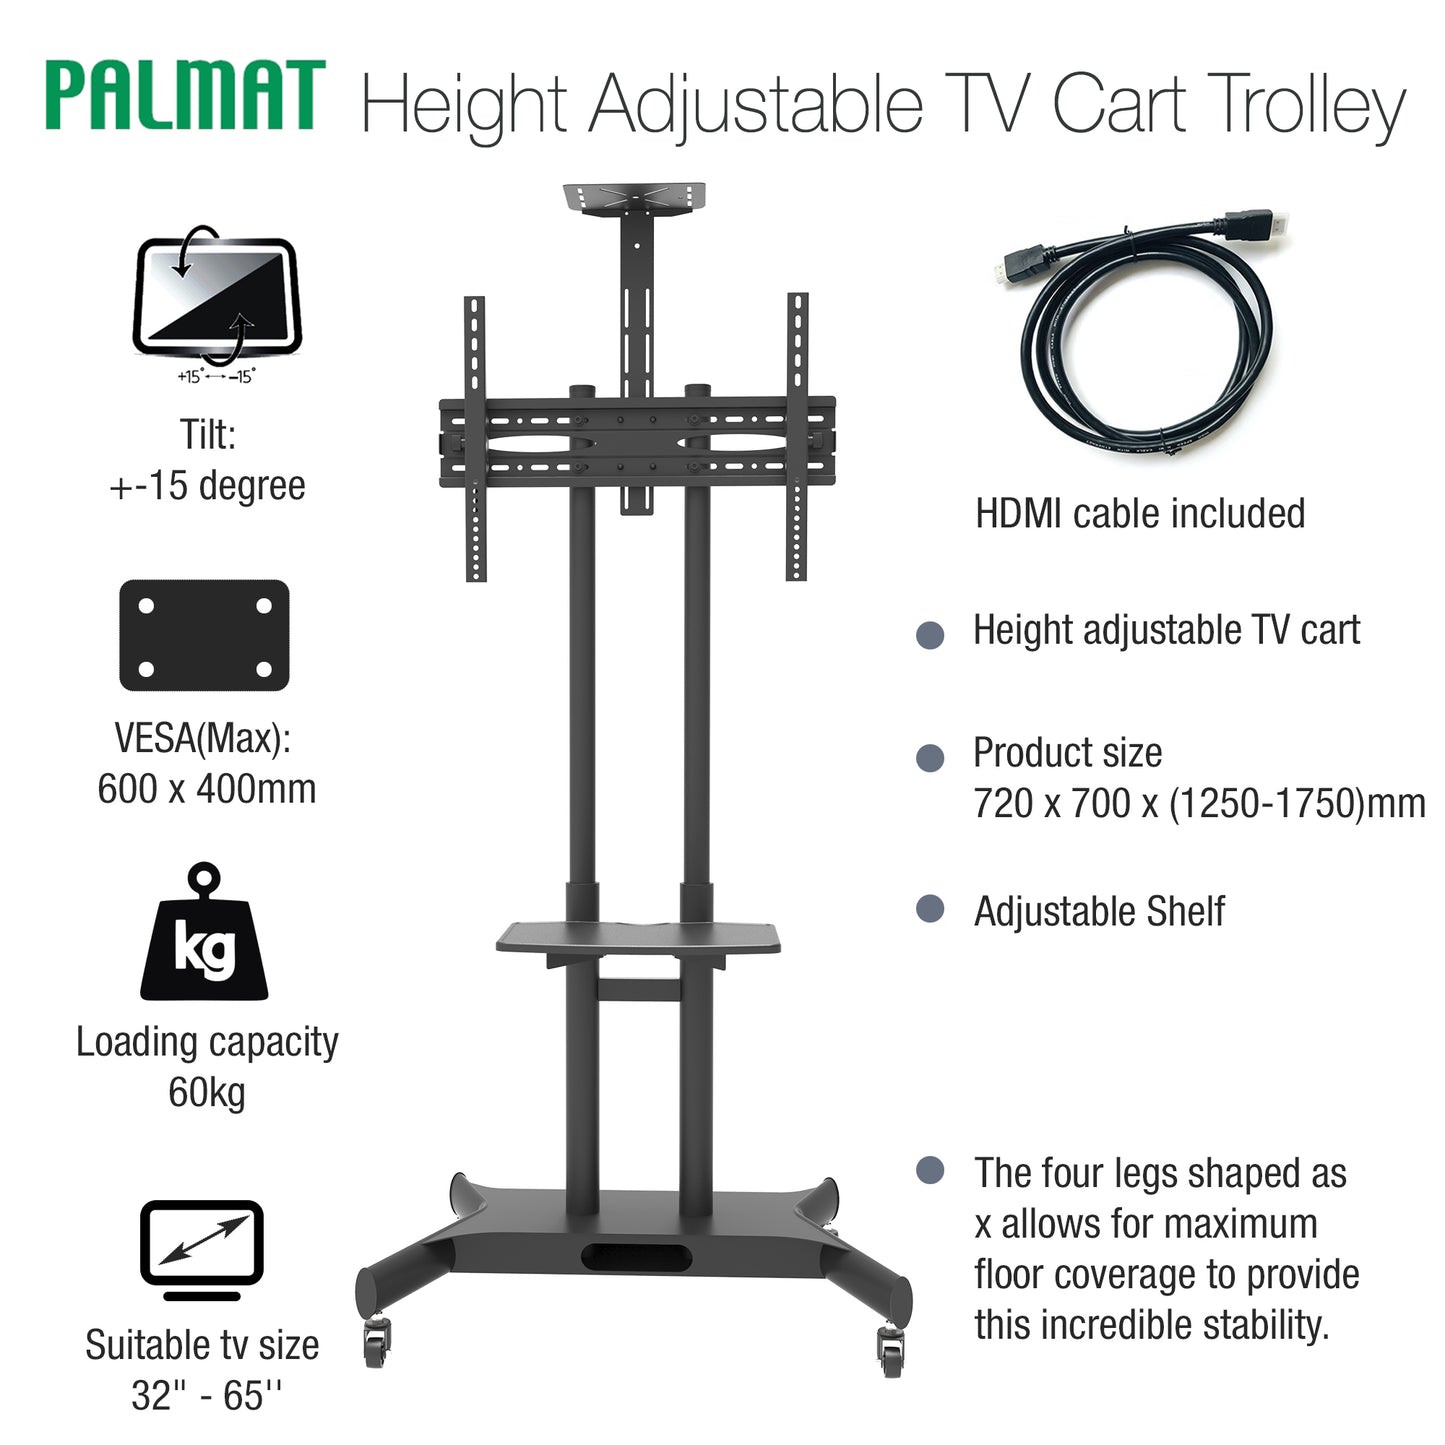 PALMAT Height Adjustable TV Cart Trolley TV Stand with Adjustable Shelf Model for 32-65 Inch with 15 Degree Tilt VERSA 600 x 400mm